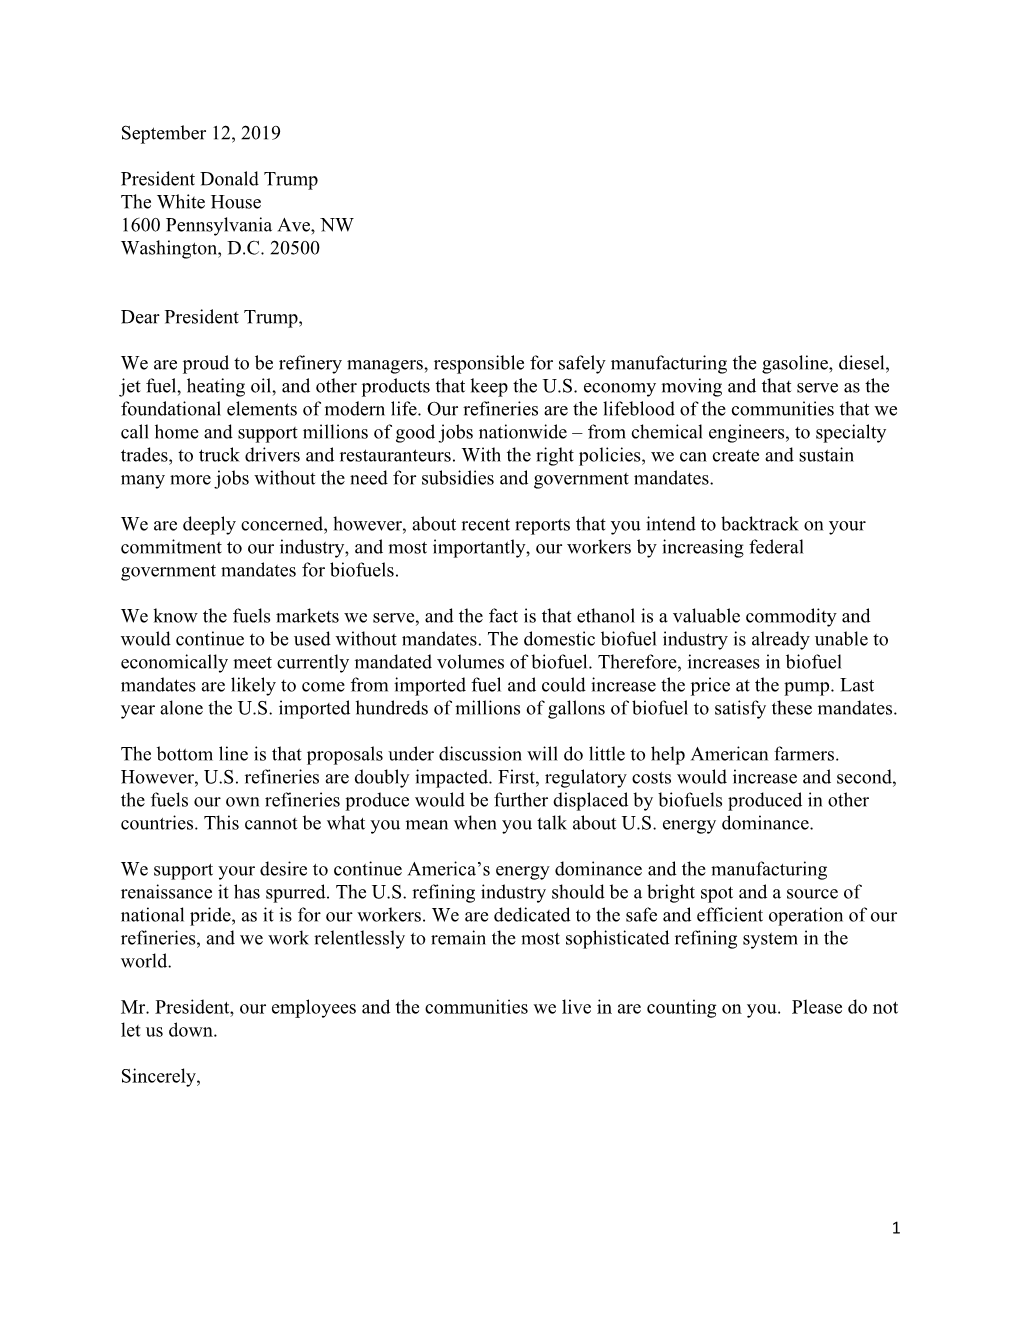 Letter to Trump from 64 Refinery Managers Urging Protection Of